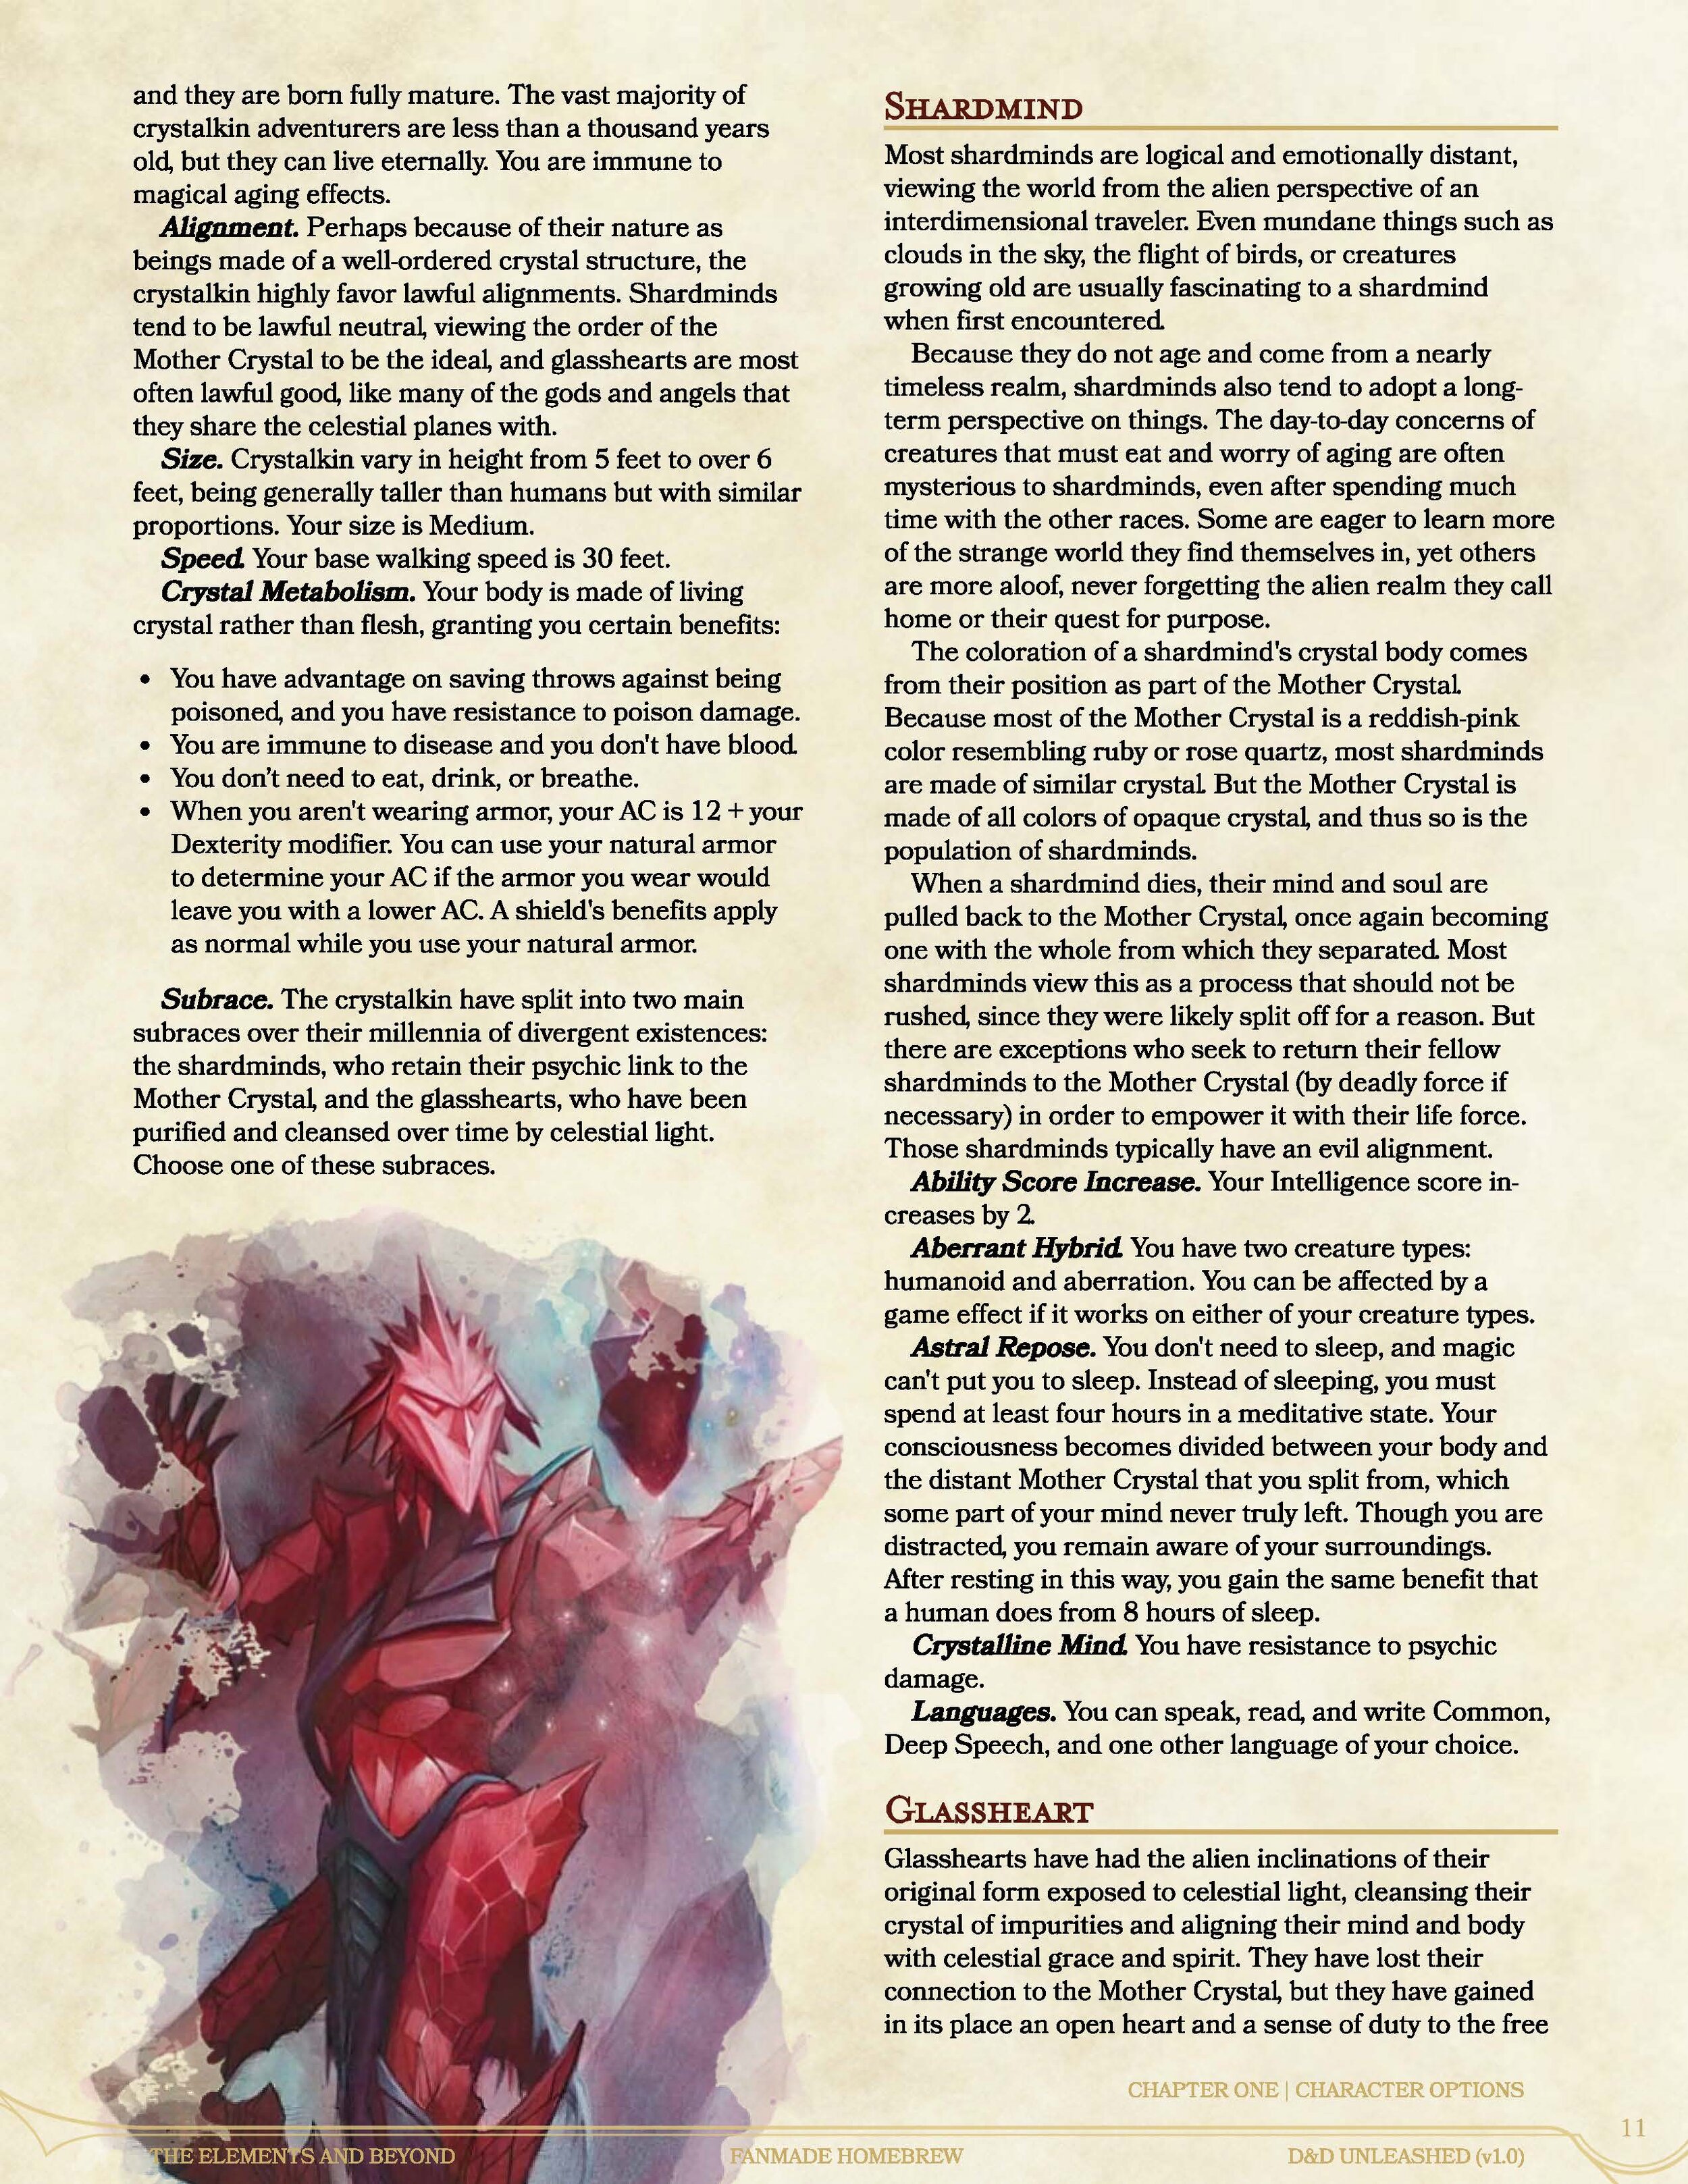 D&D Unleashed Compendium -- The Elements and Beyond (v1p0)_Page_011.jpg